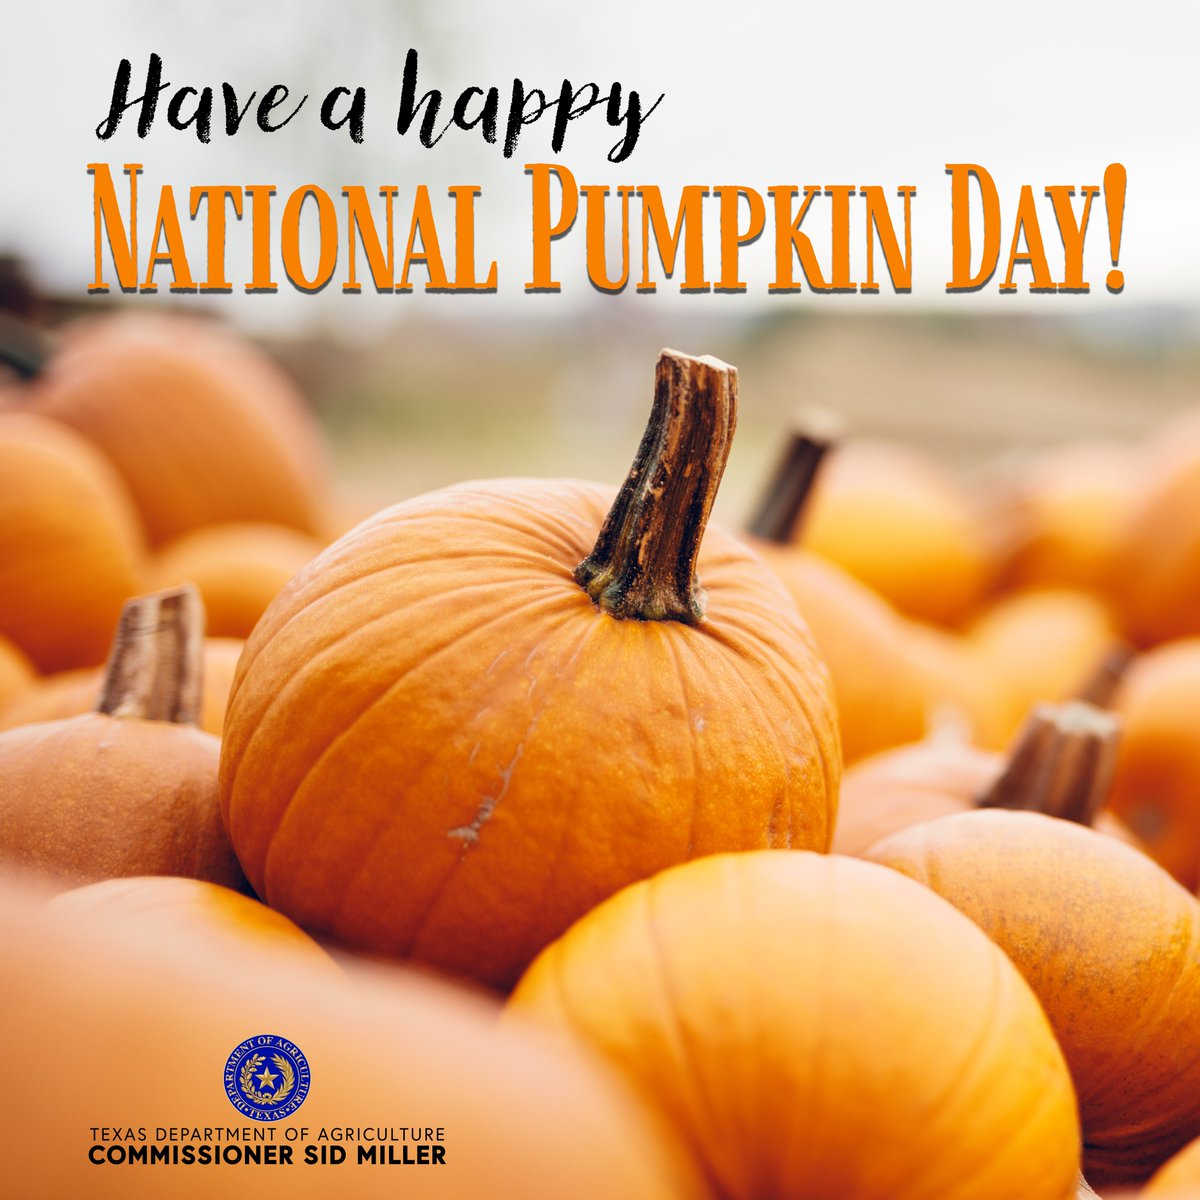 Commissioner Miller would like to wish everyone a happy #NationalPumpkinDay! Texas is the fourth-leading state in pumpkin output, producing more than 100 million pounds of pumpkins. This a testament to our great state's dedicated farmers and ranchers. #TexasAgricultureMatters